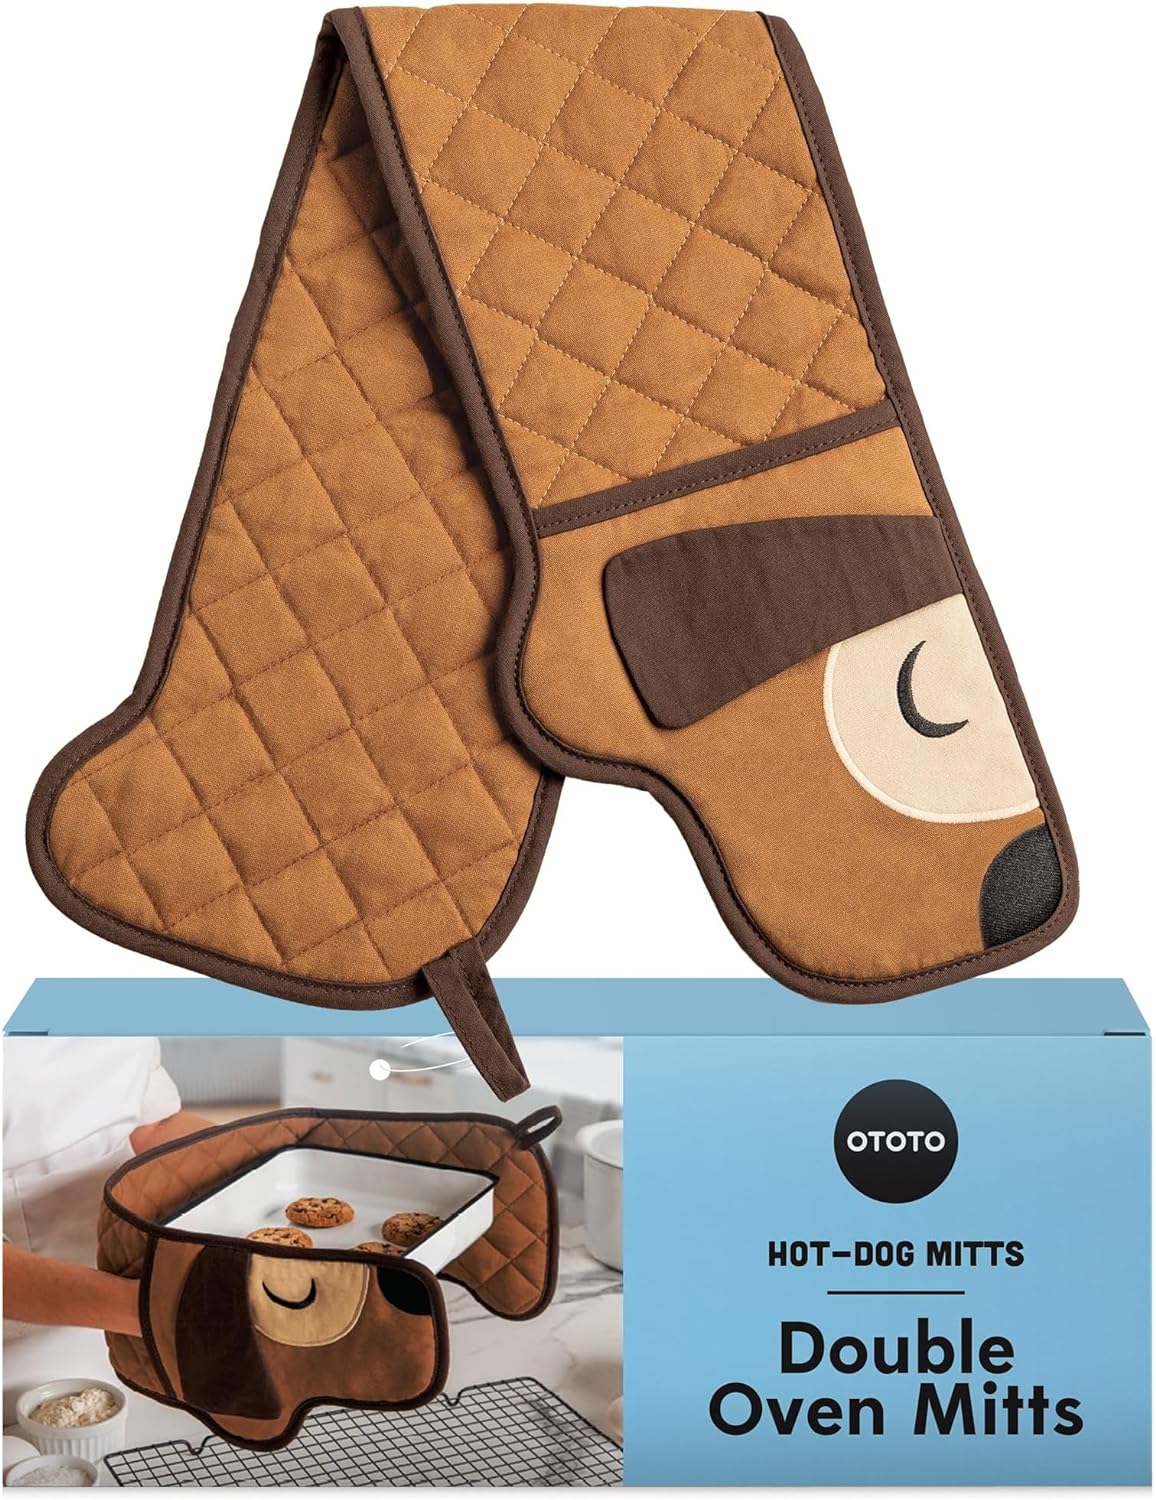 New!! Hot-Dog Oven Mitts Cute Funny Oven Mitts by OTOTO – Gifts for Dog Lovers, Dachshund Dog Themed Gifts, Oven Mitts Dogs, Dog Lover Gifts, Double Oven Mitts Heat Resistant, Kitchen Gadgets (Brown)